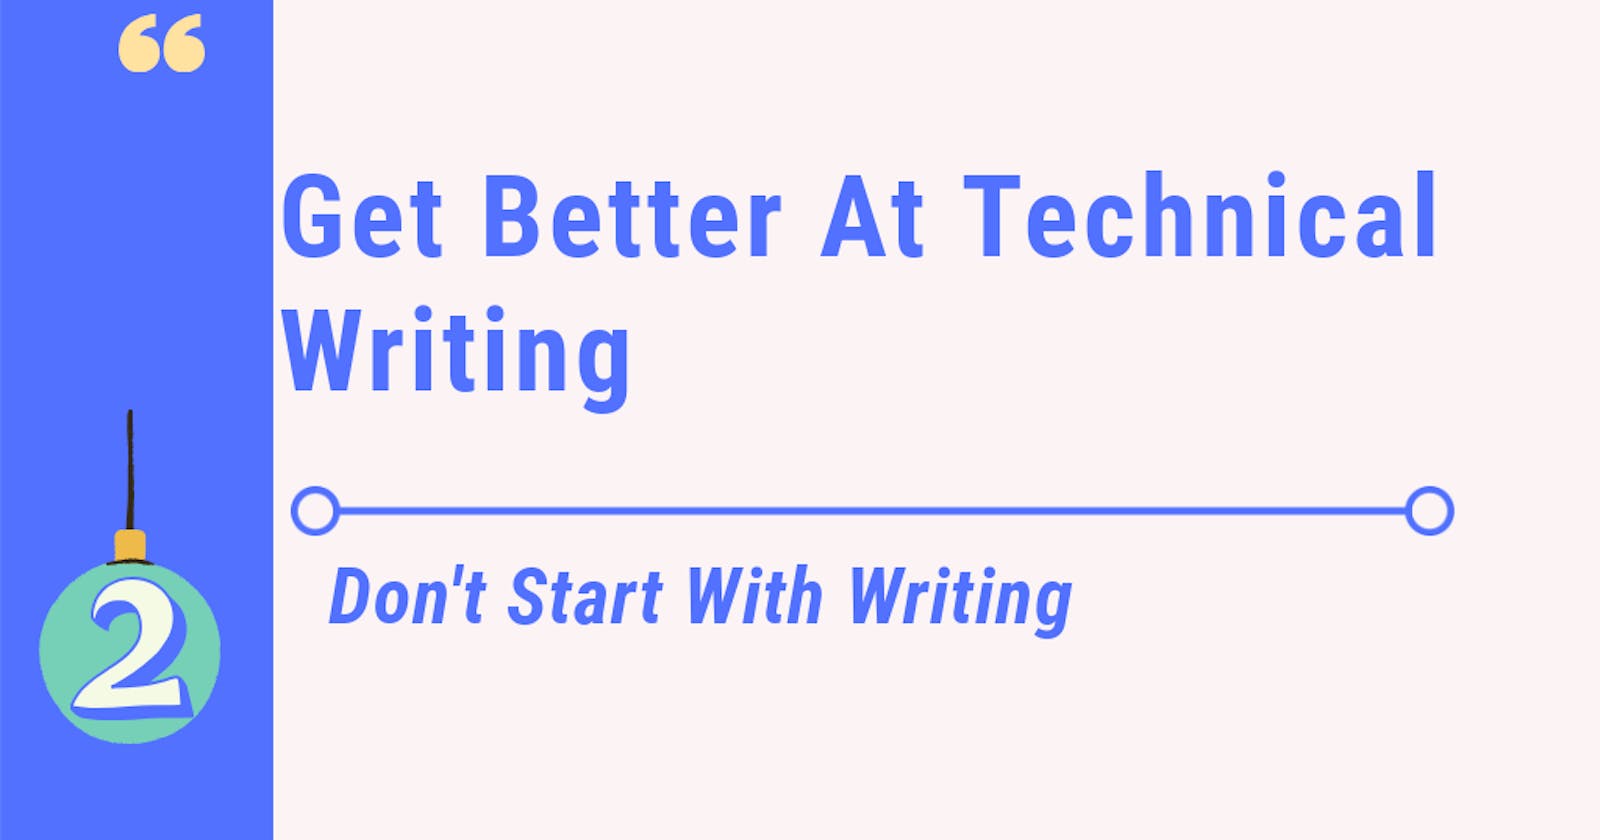 Get Better At Technical Writing 2: Don't Start With Writing